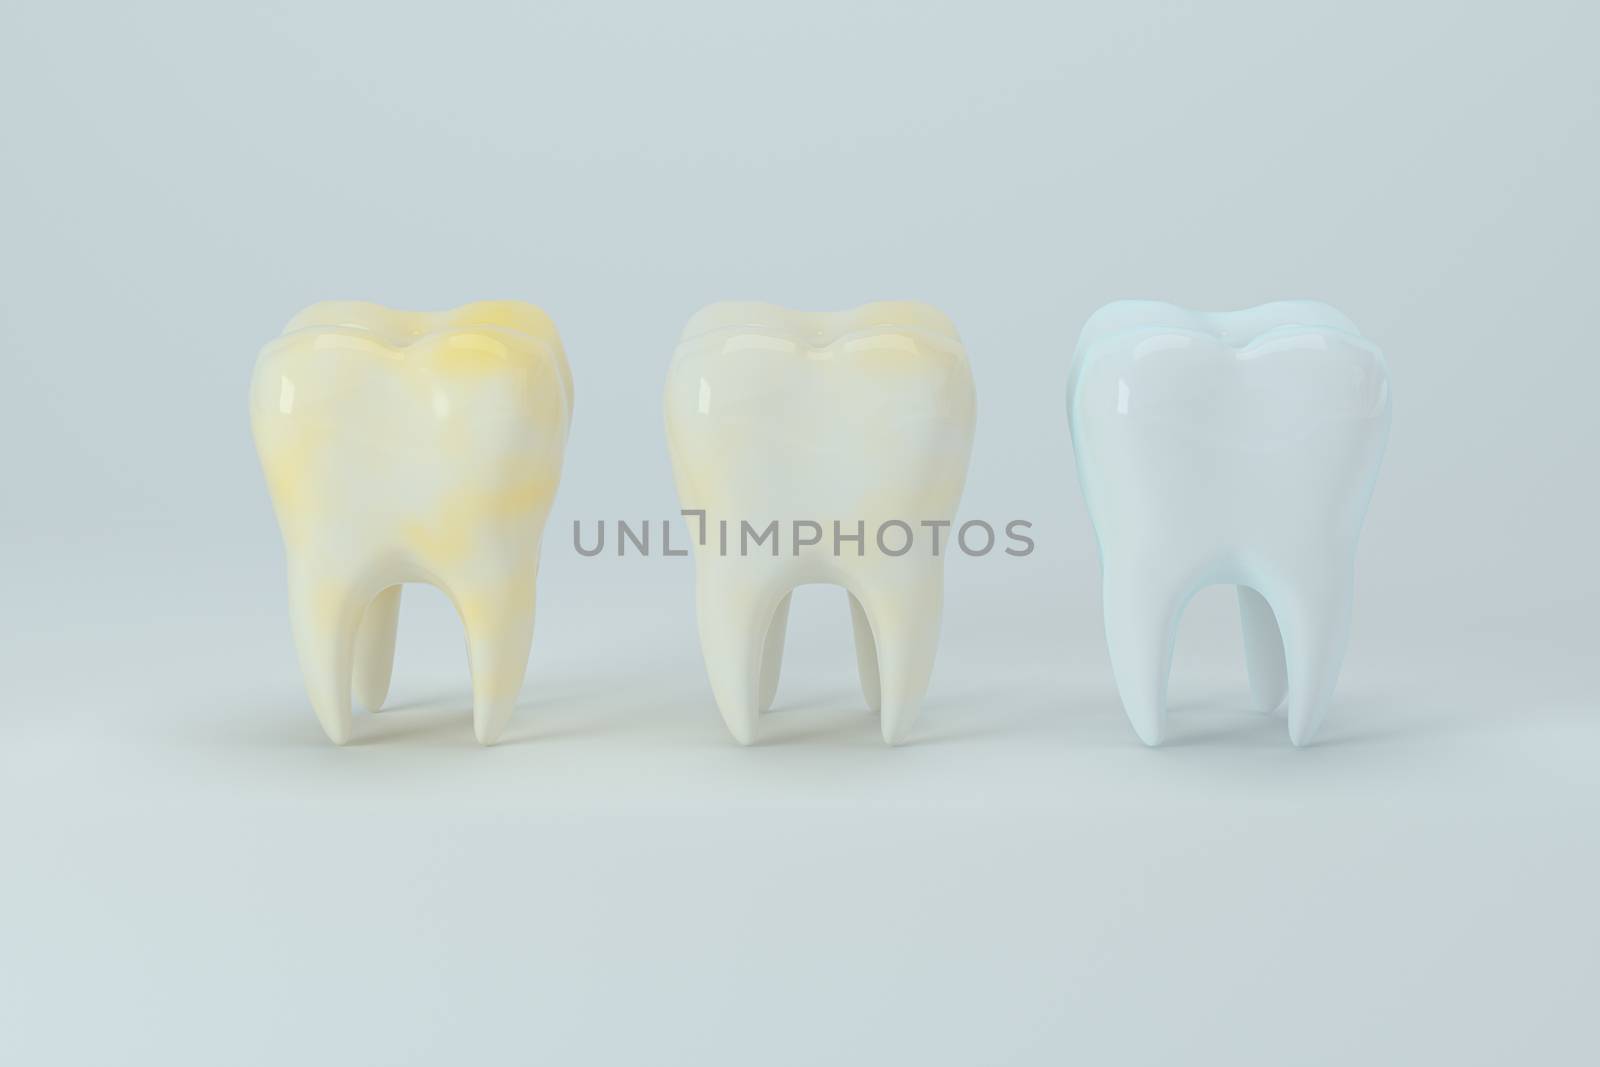 Changing of the tooth color from yellow to white, 3d rendering. Computer digital drawing.